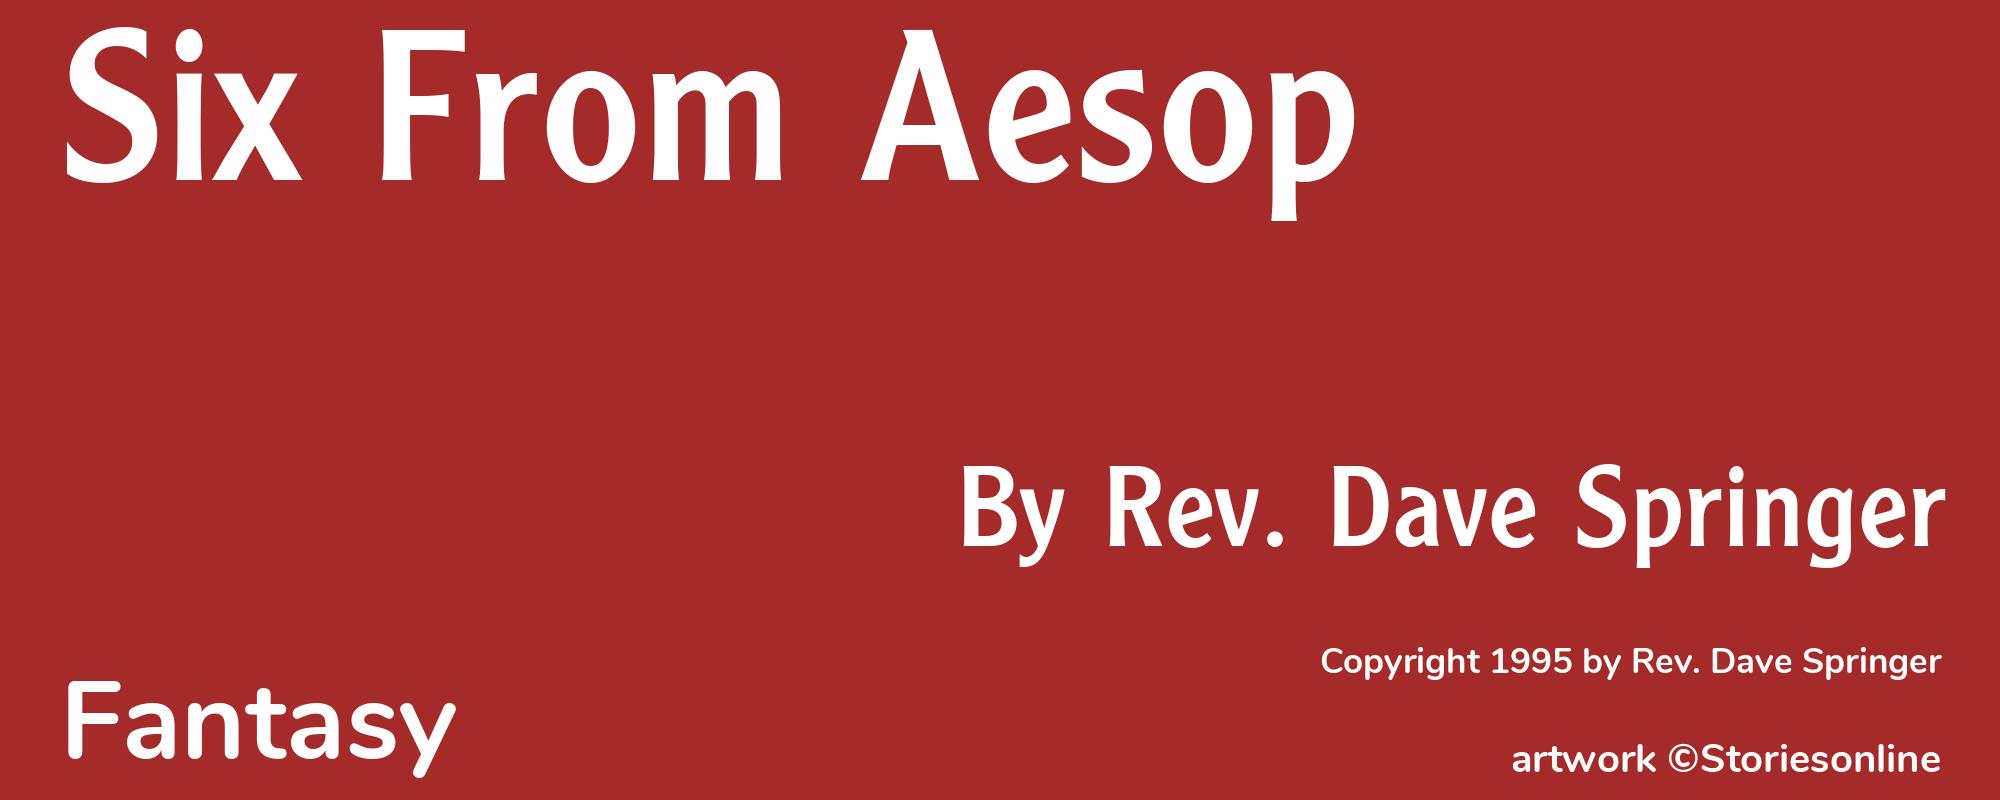 Six From Aesop - Cover